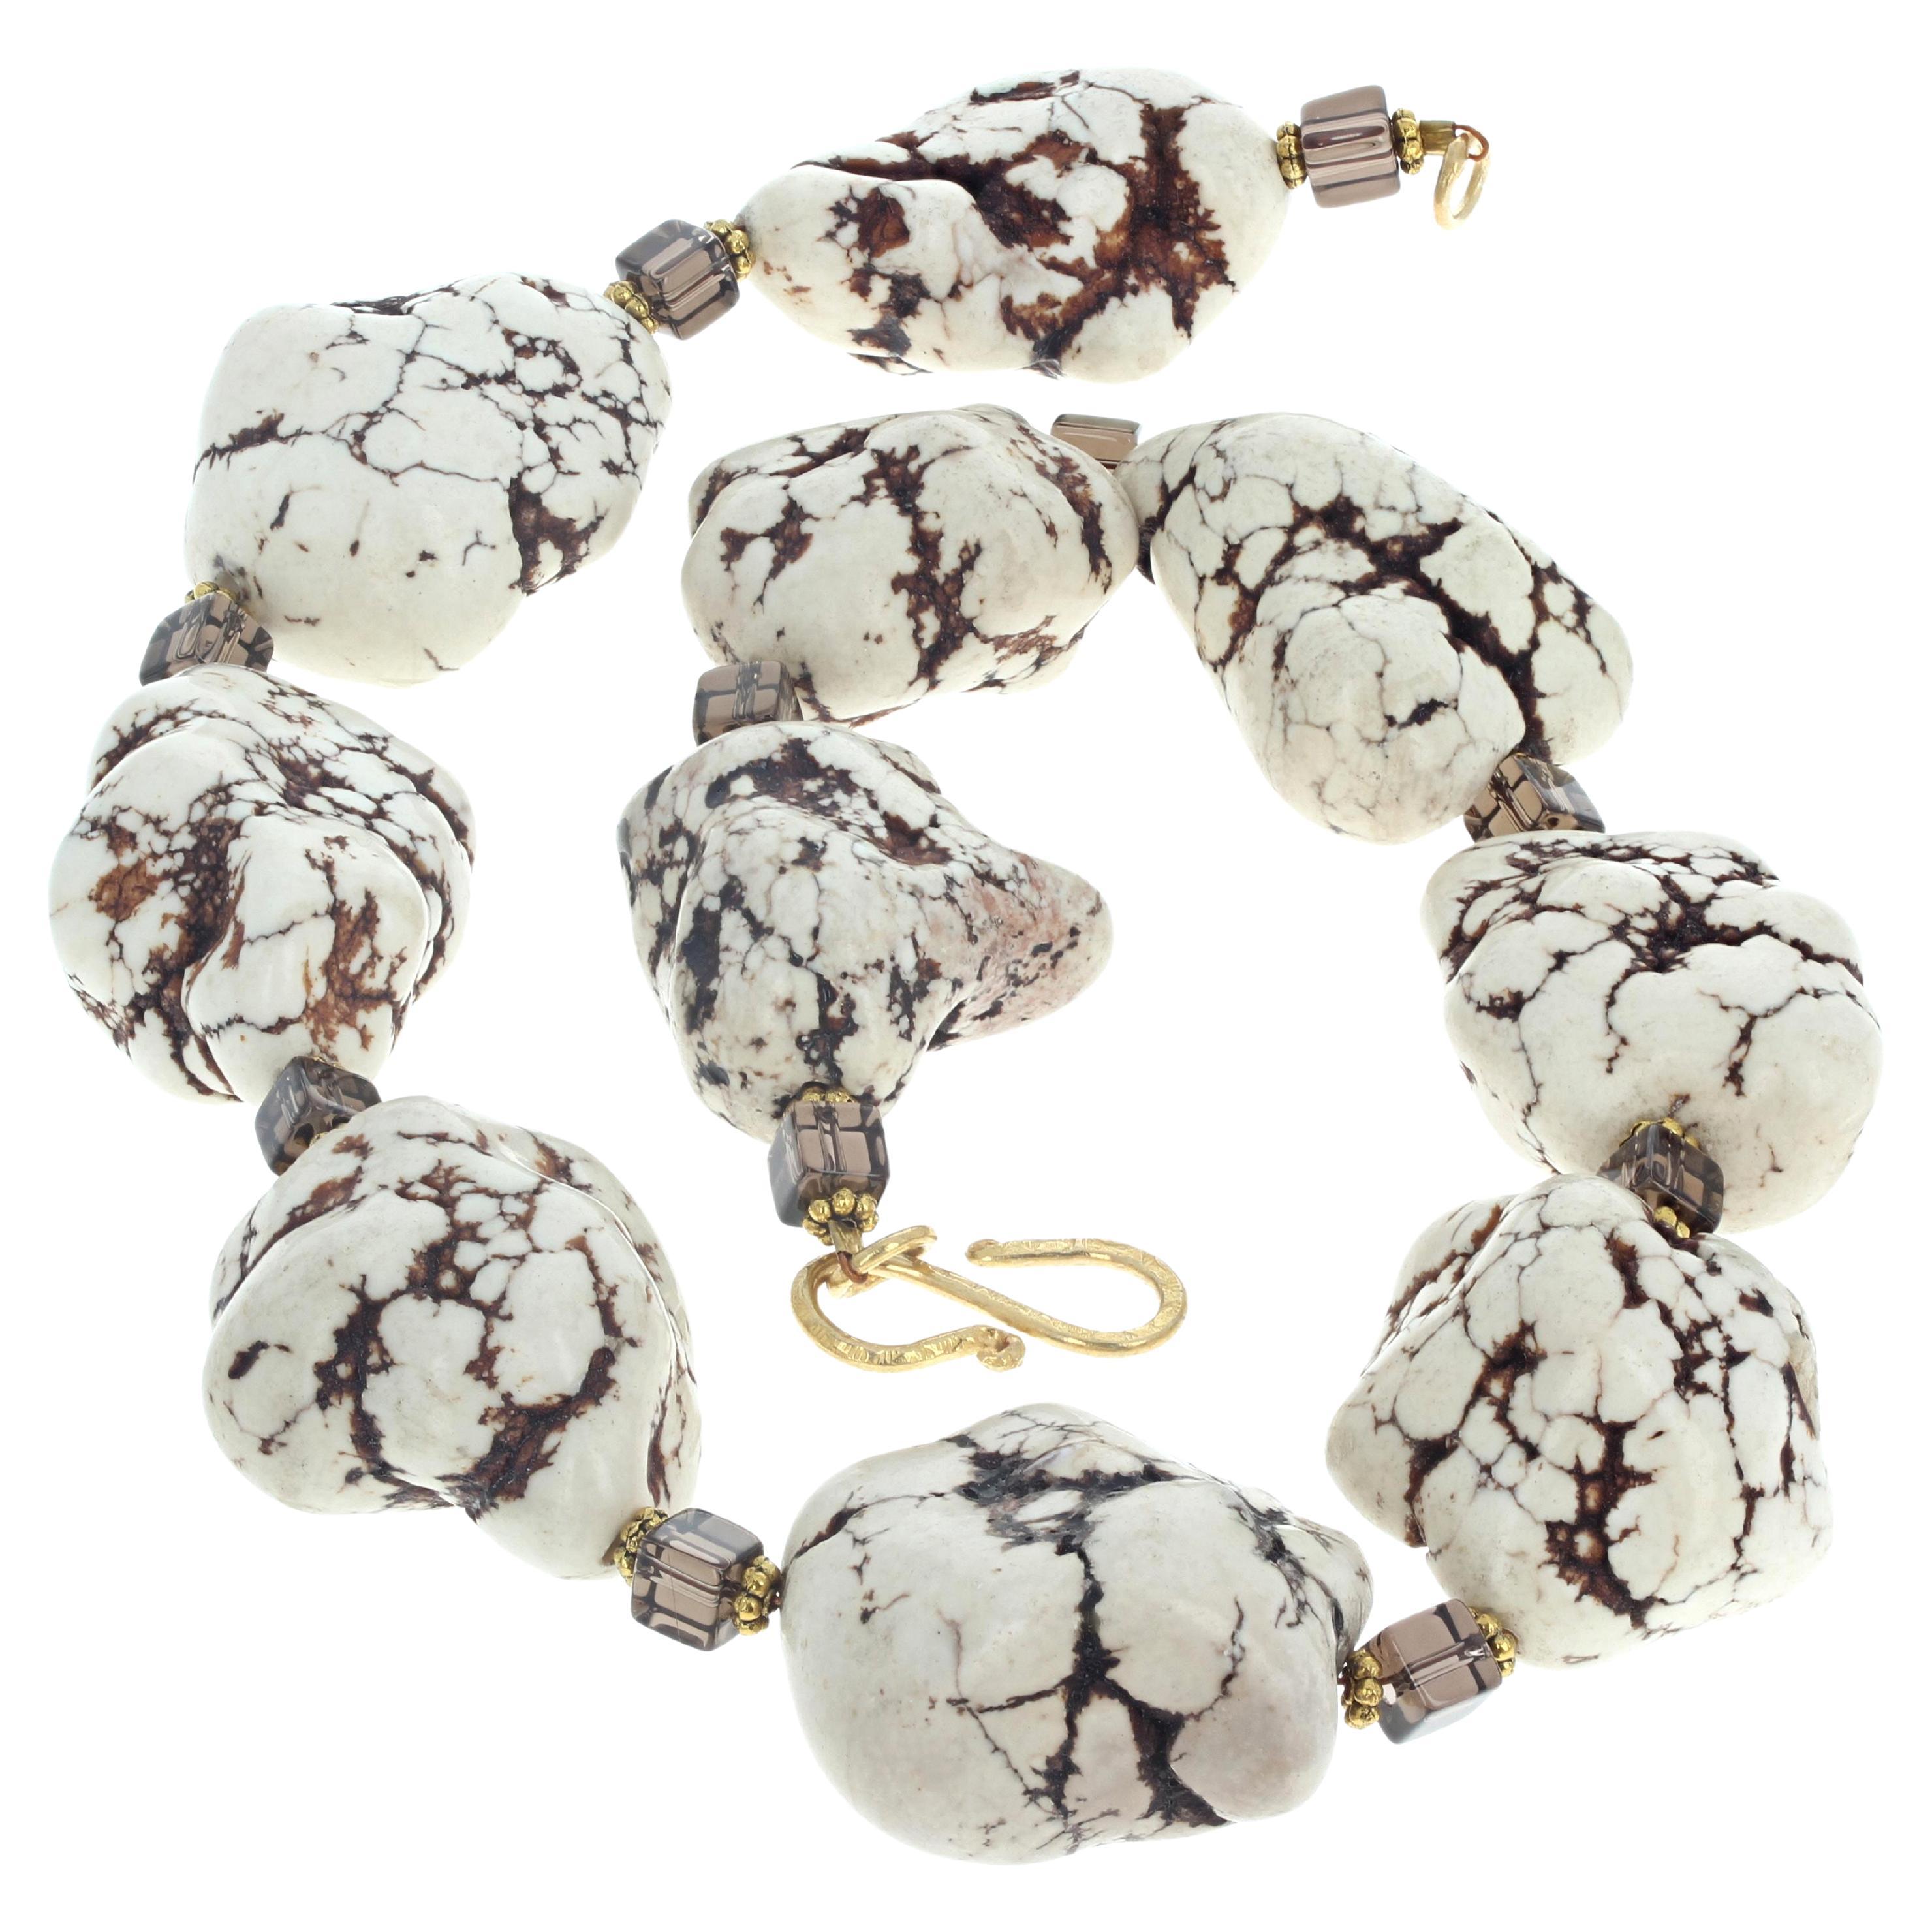 Known as Howlite Crystal Beads - Creamy White Brown Vein Beads - these are polished so they sit comfortably and artistically around your neck in this 19 inch long necklace enhanced with large gem cut rectangles of natural Smoky Quartz.  The largest